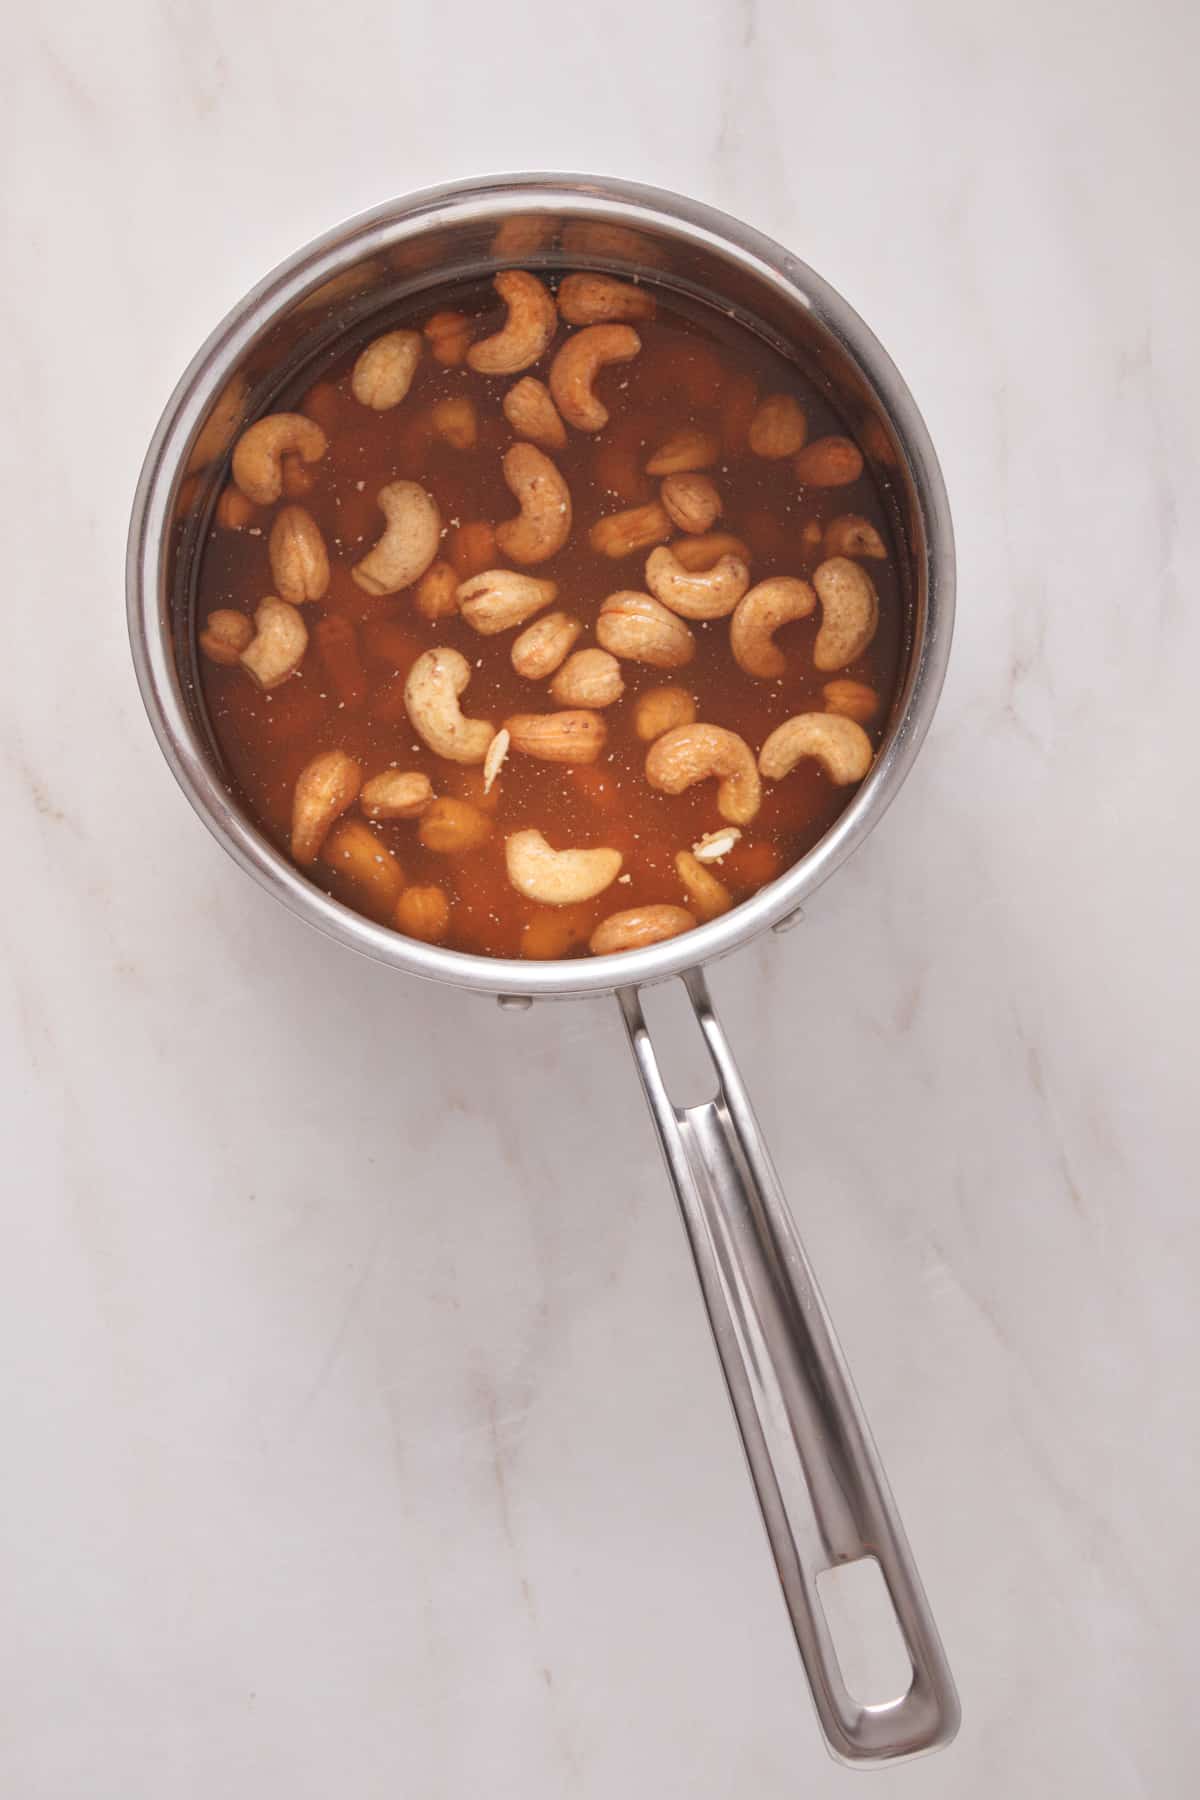 Cashews, vegetable broth and vodka in a stainless steel pot.